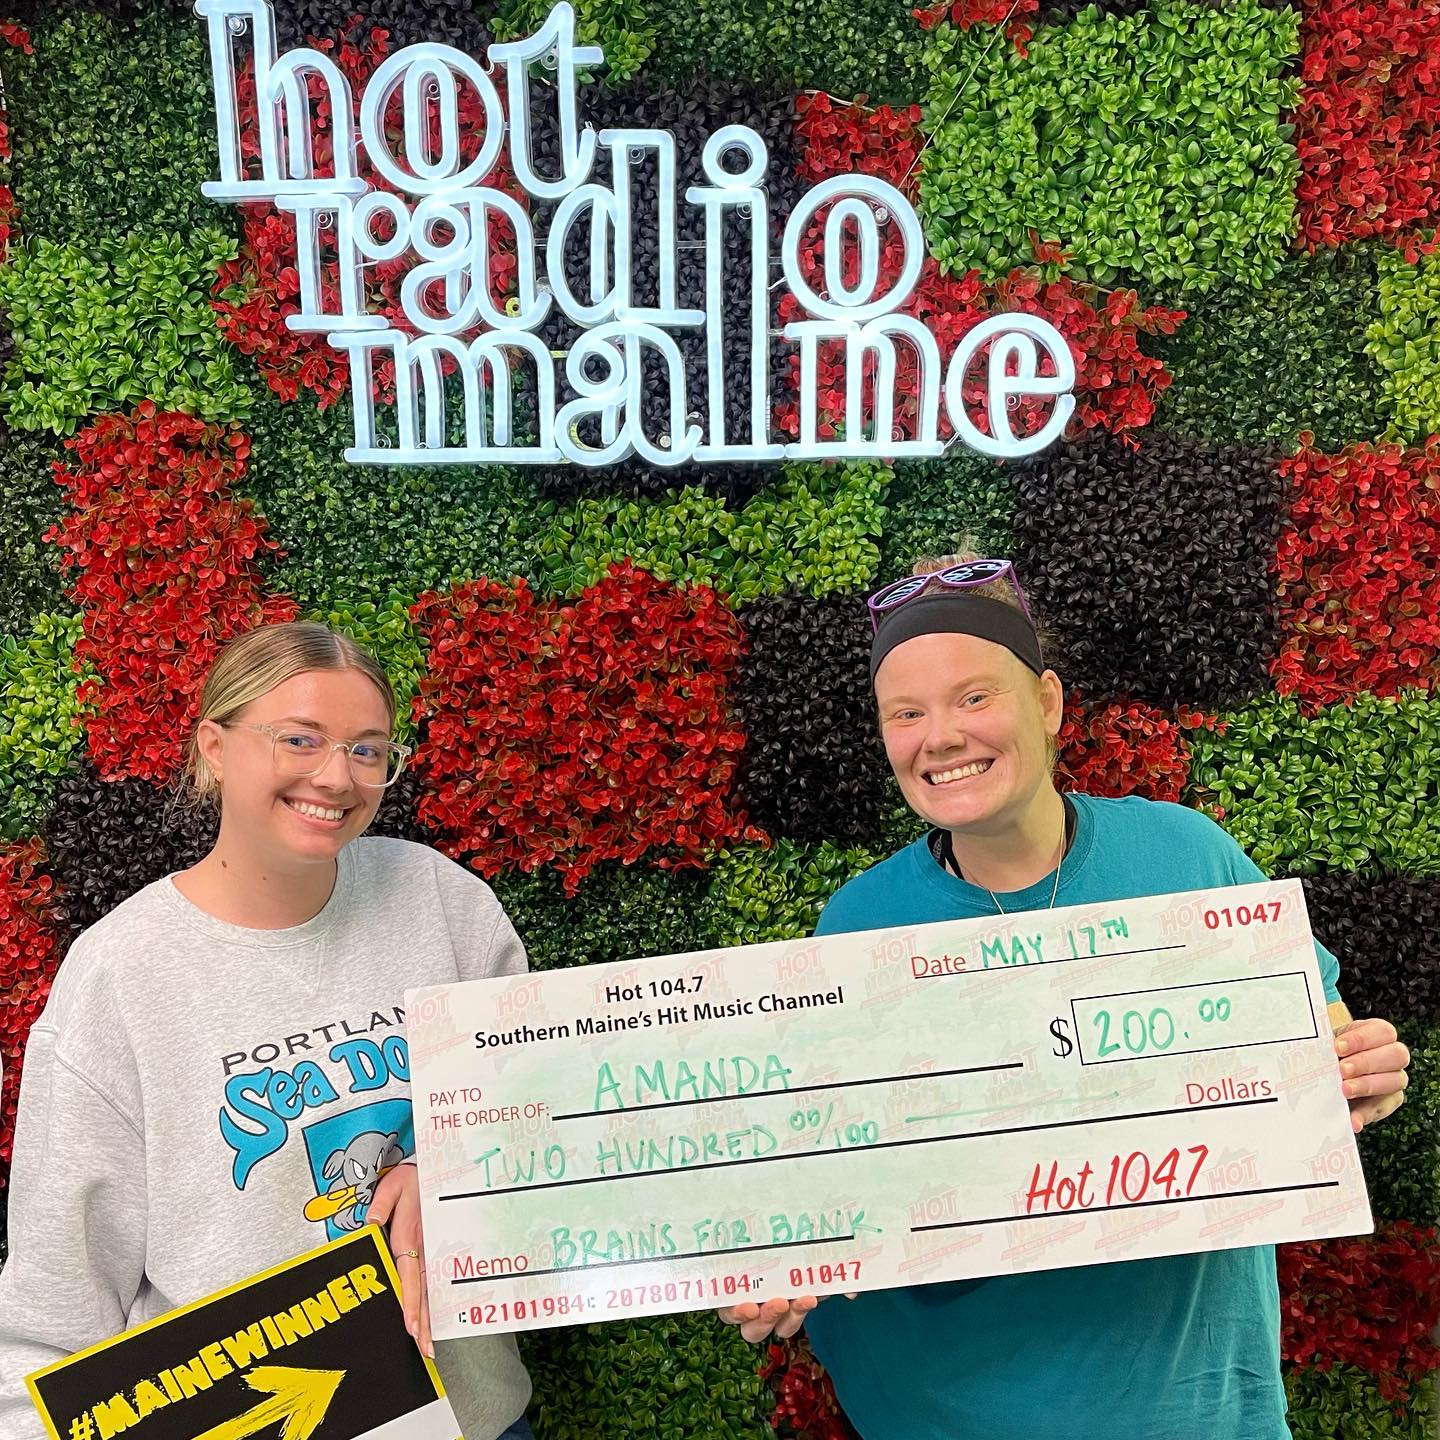 Shout out to Amanda from Biddeford - She just picked up her $200 #BrainsForBank prize! Next chance to play is coming up at 5pm with @aullthat & itâ€™s made Hot in Maine by @leeautomalls ðŸ§ ðŸ¦#MaineMadeWinners